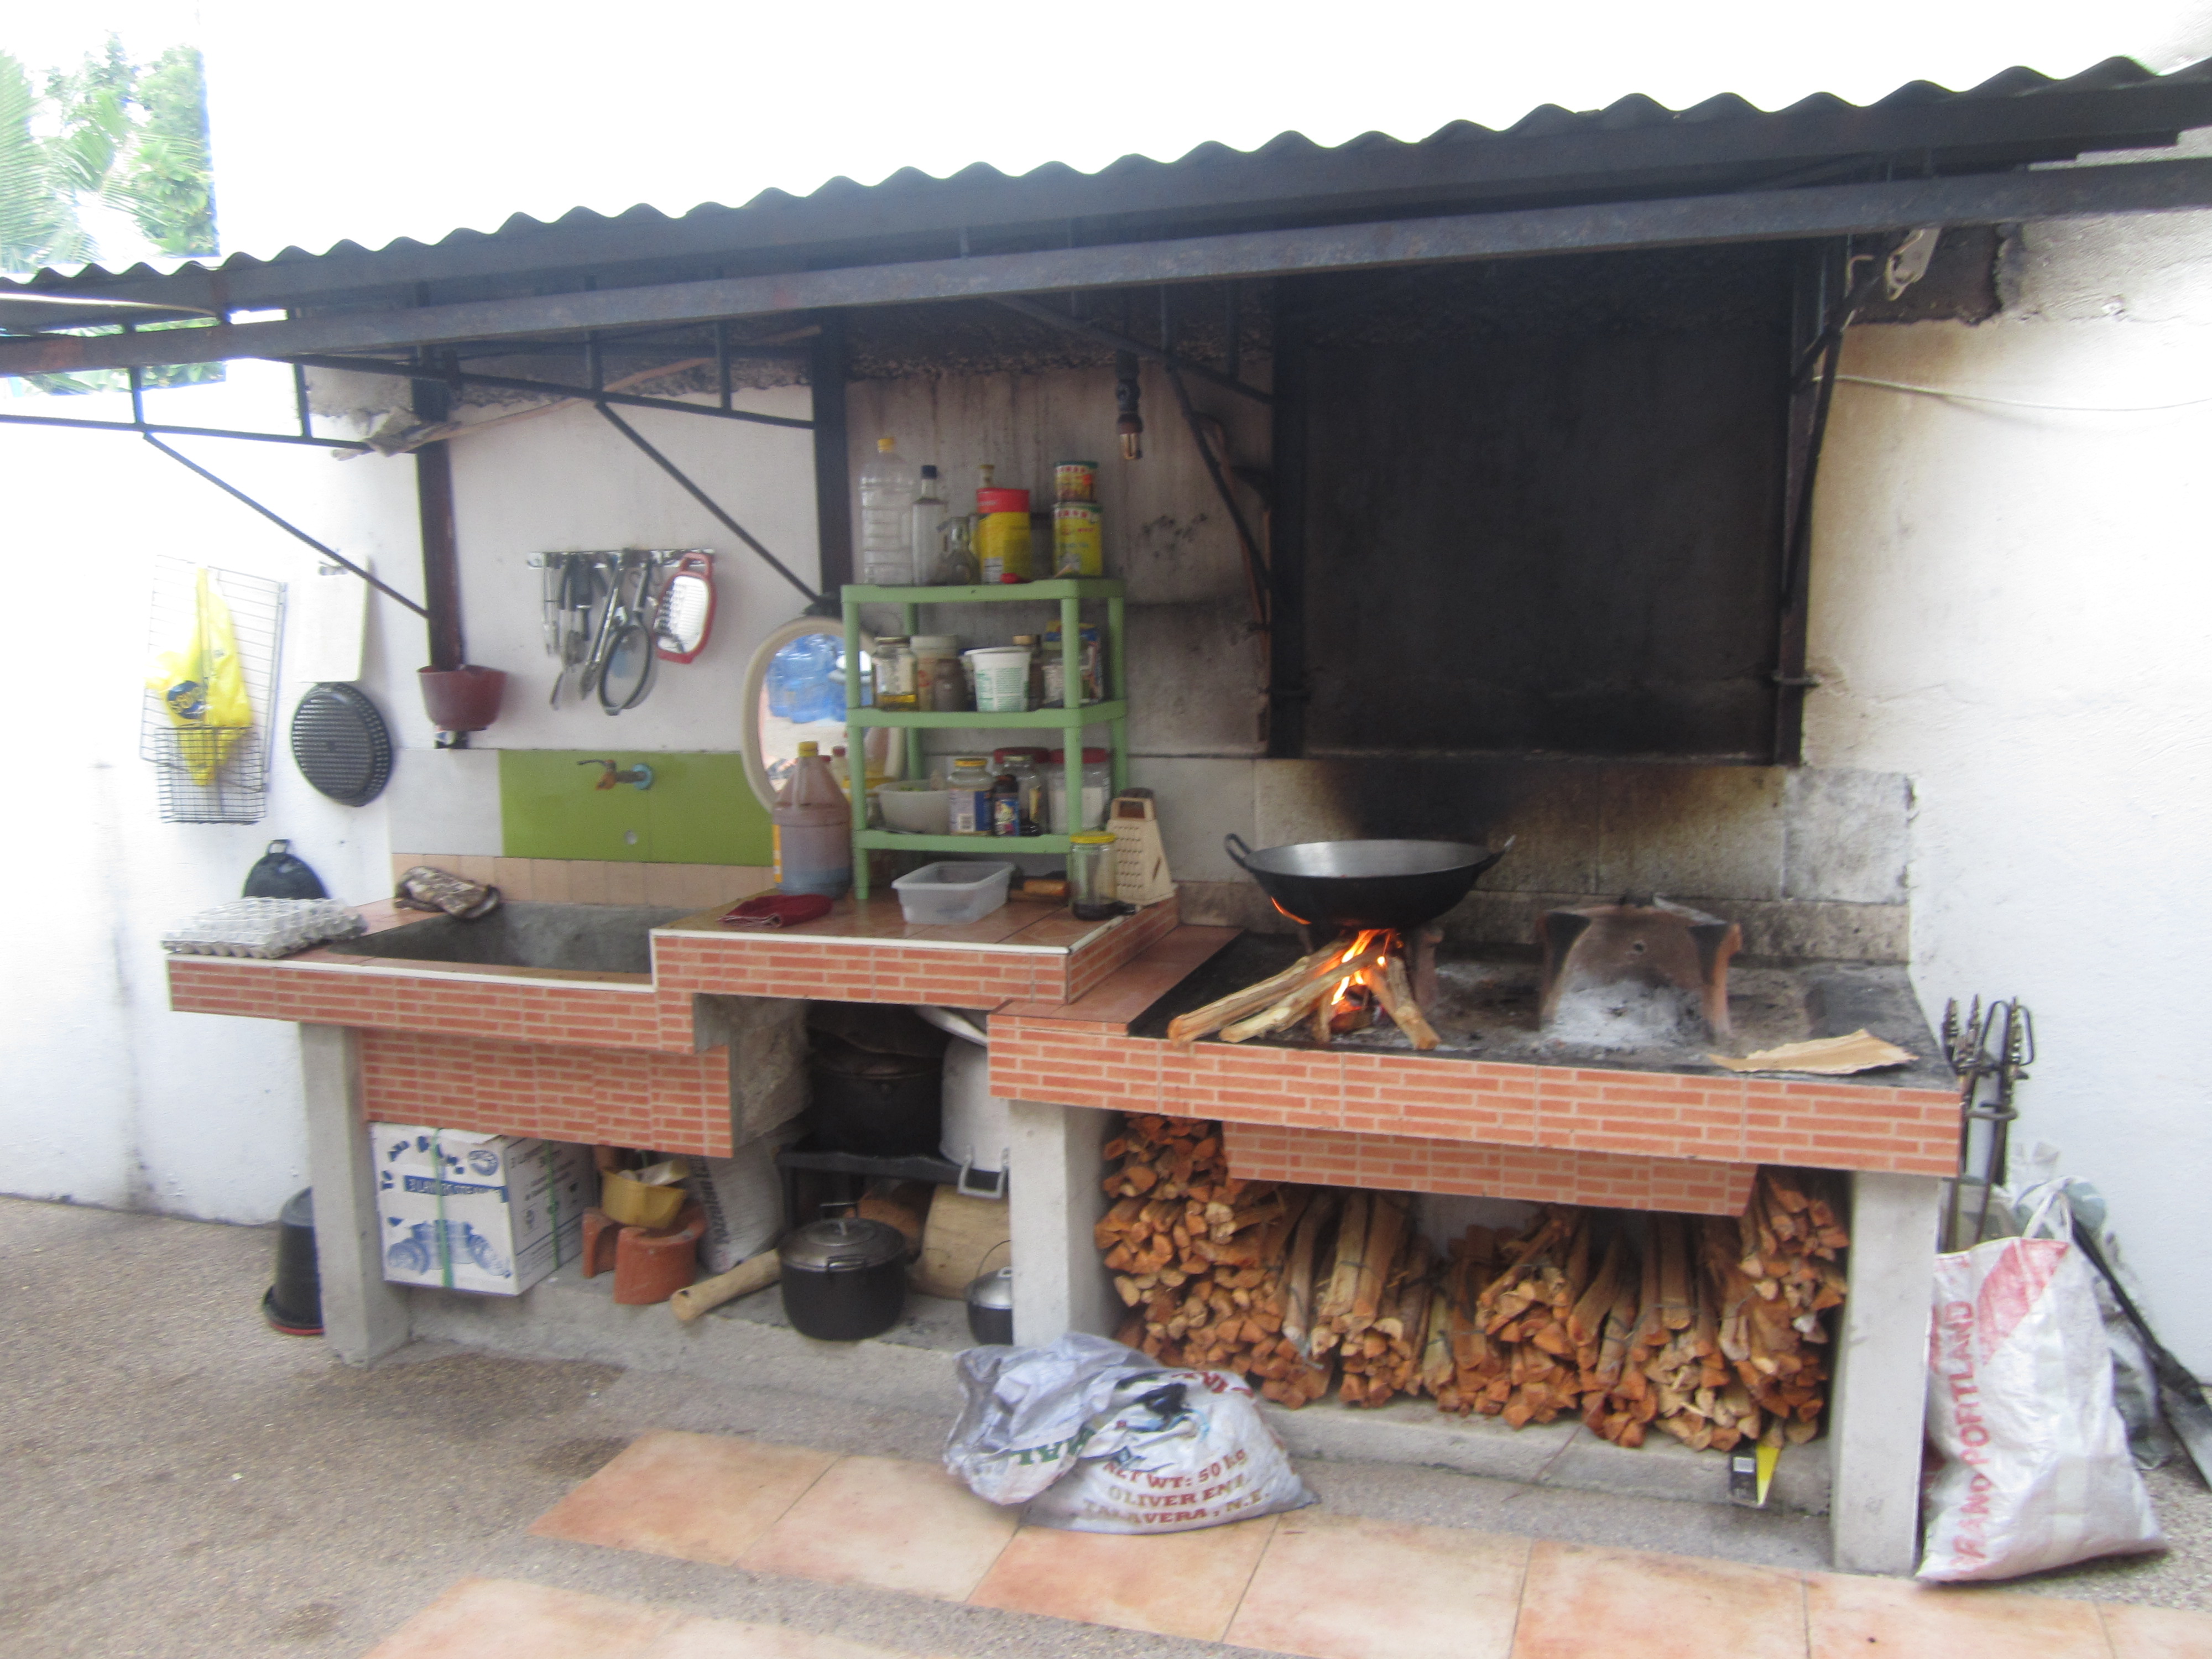  Outdoor  Kitchen  in the Philippines  FoodMeOmaha